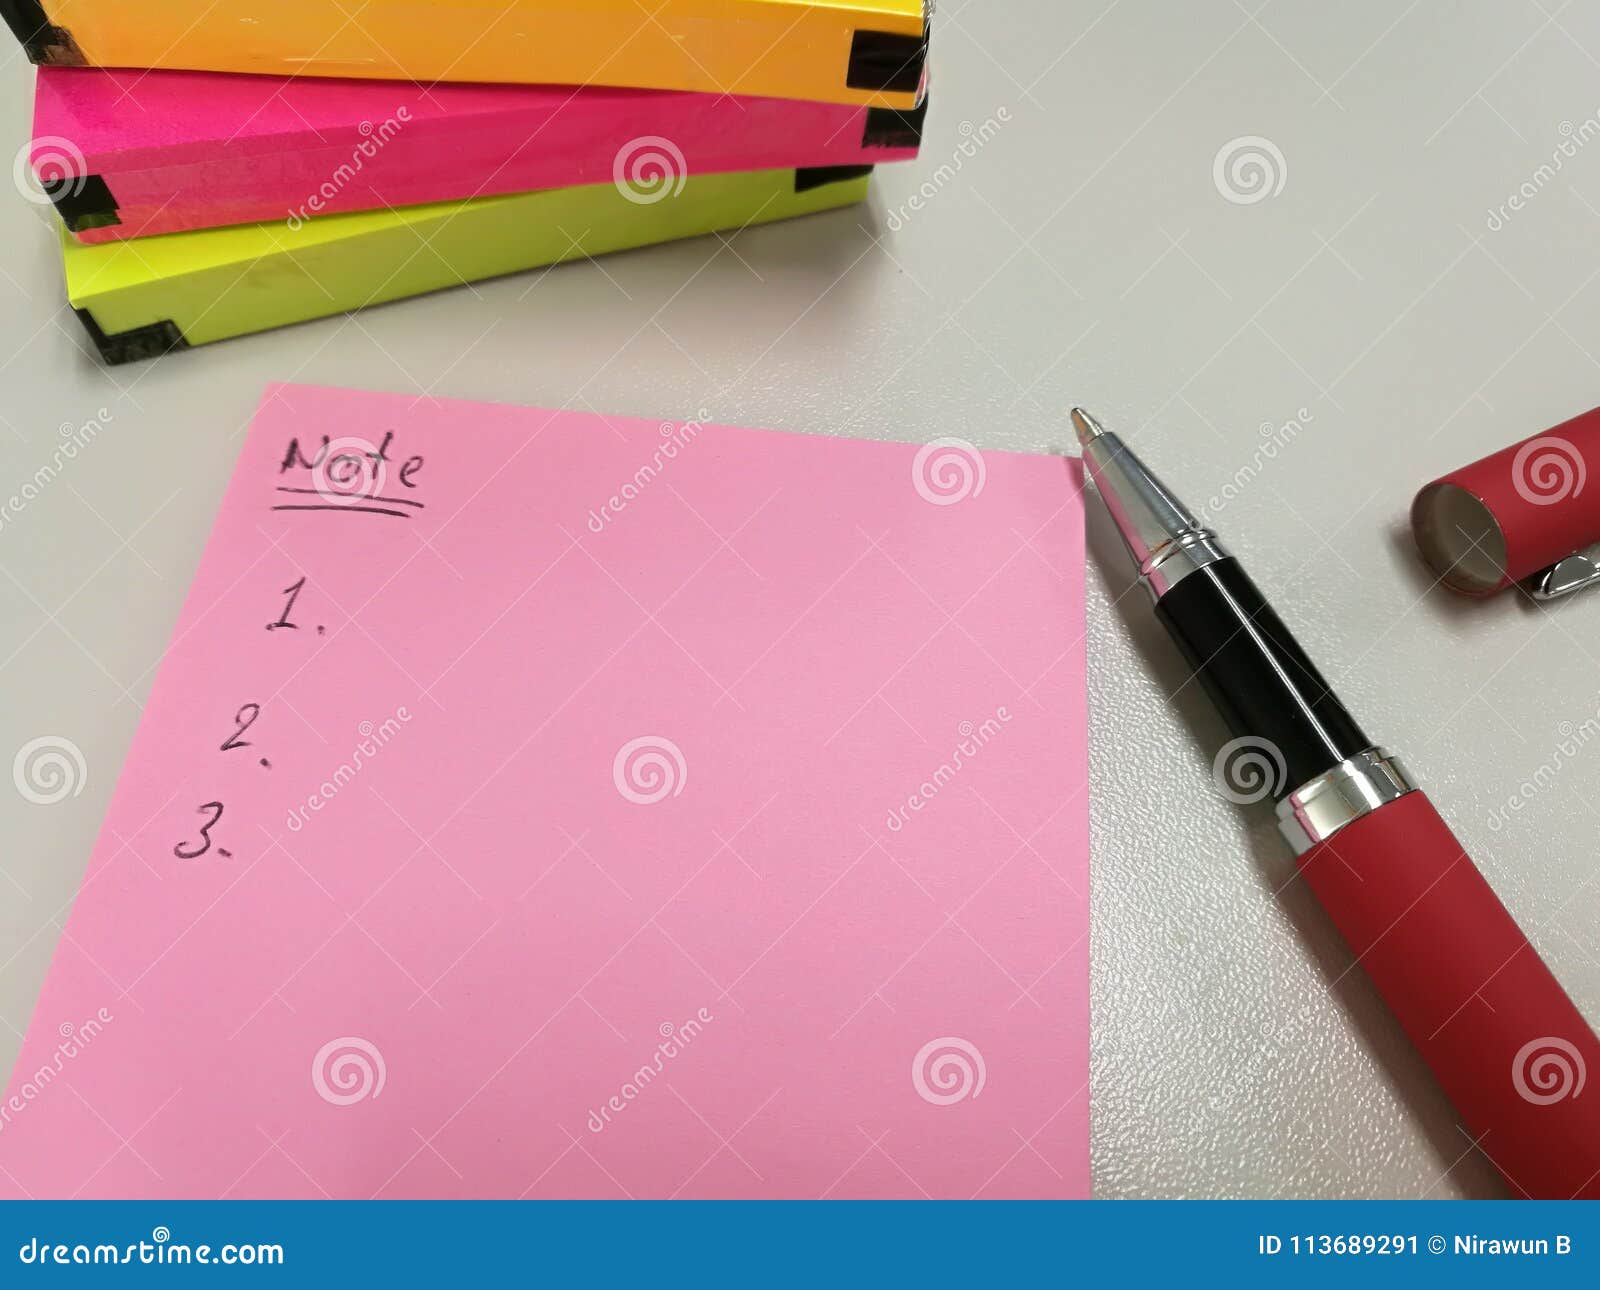 blank pink paper note. put near pen and pack of colorful papernote